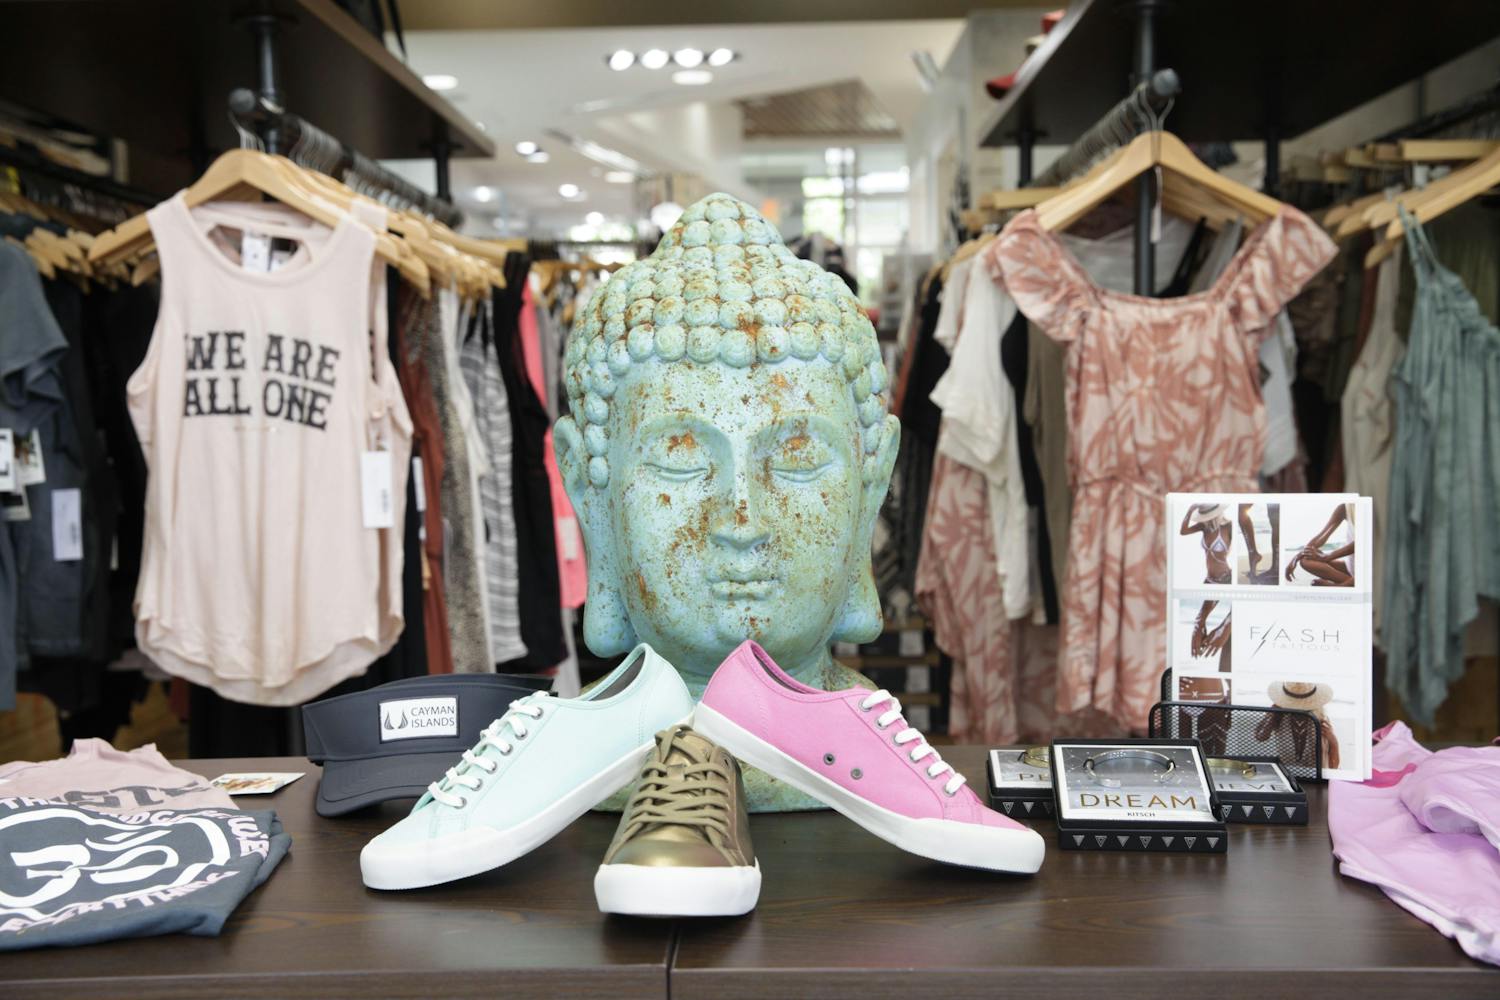 Front window display of shoes and tanks with an ornamental buddah head in the centre